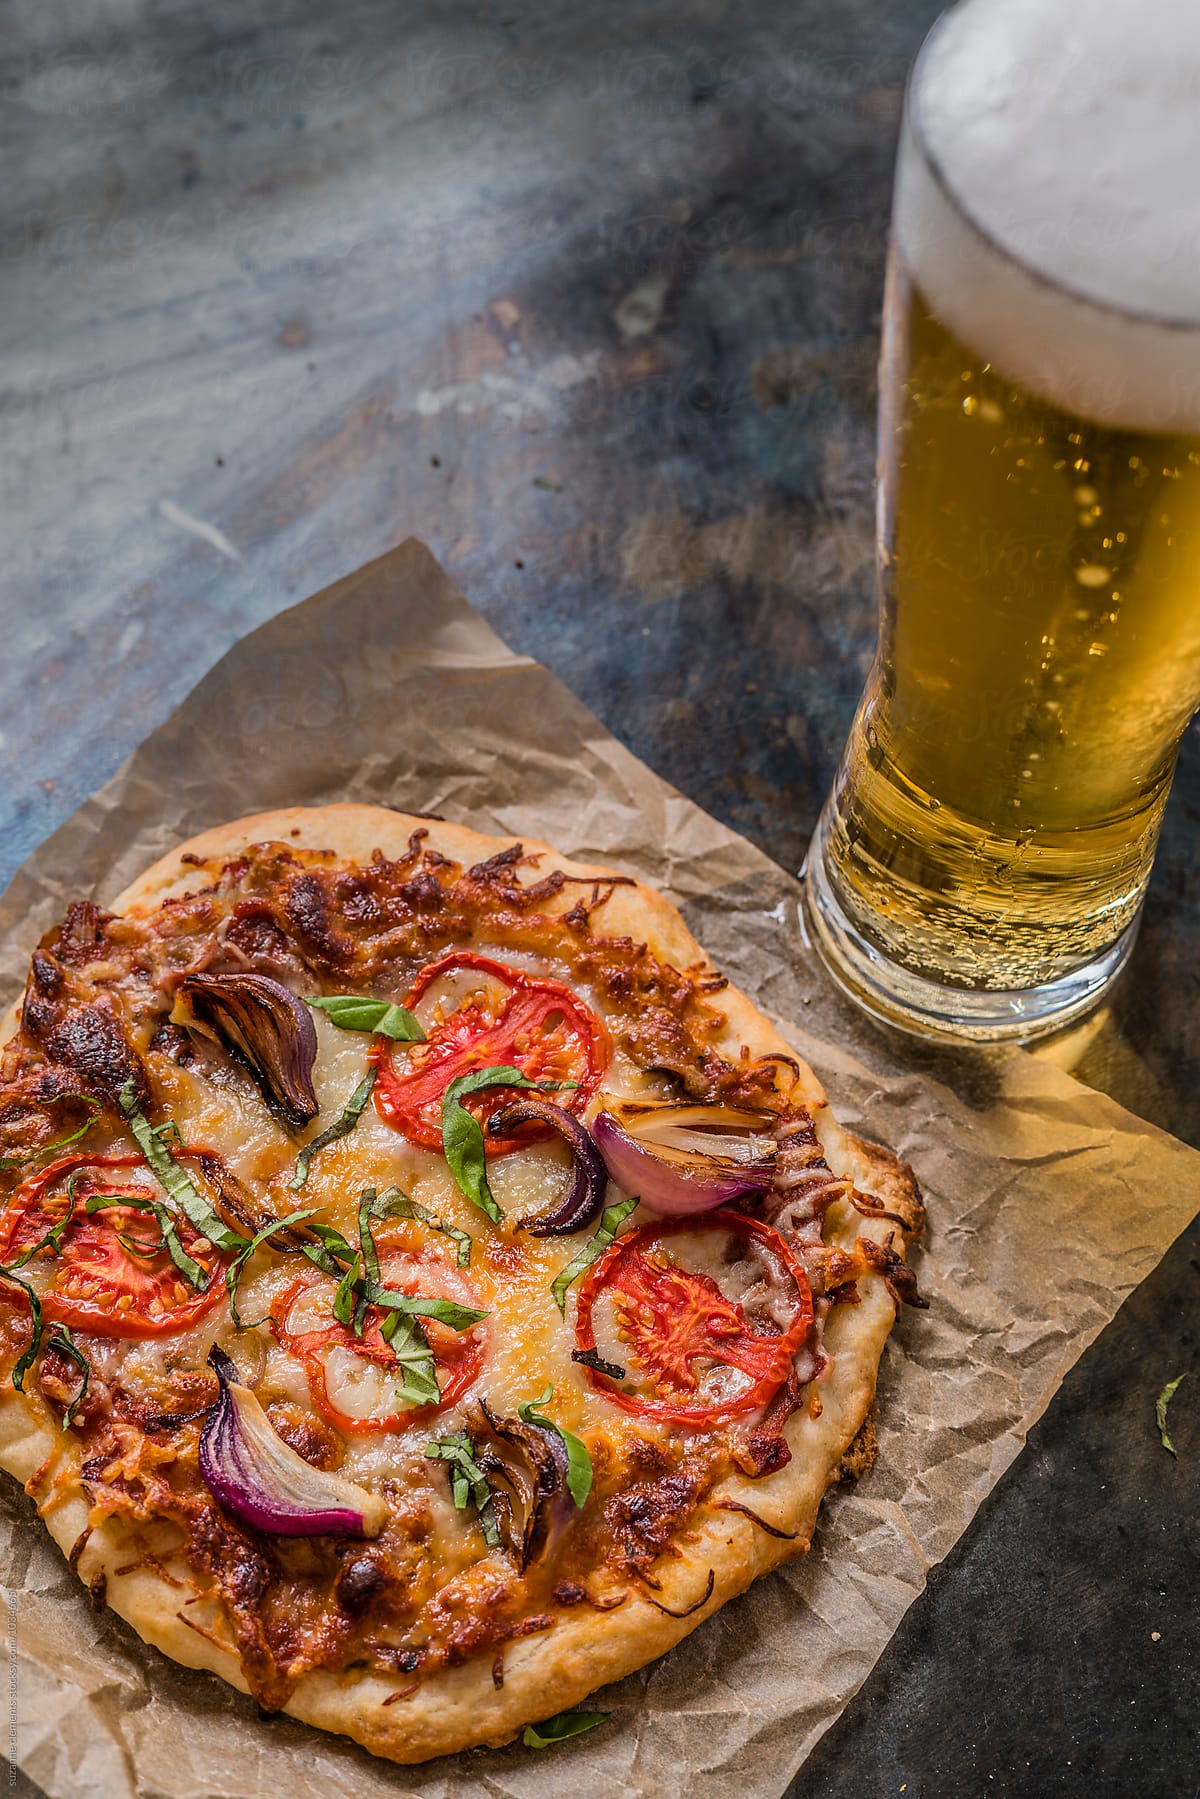 Tomato and Onion Pizza with Beer